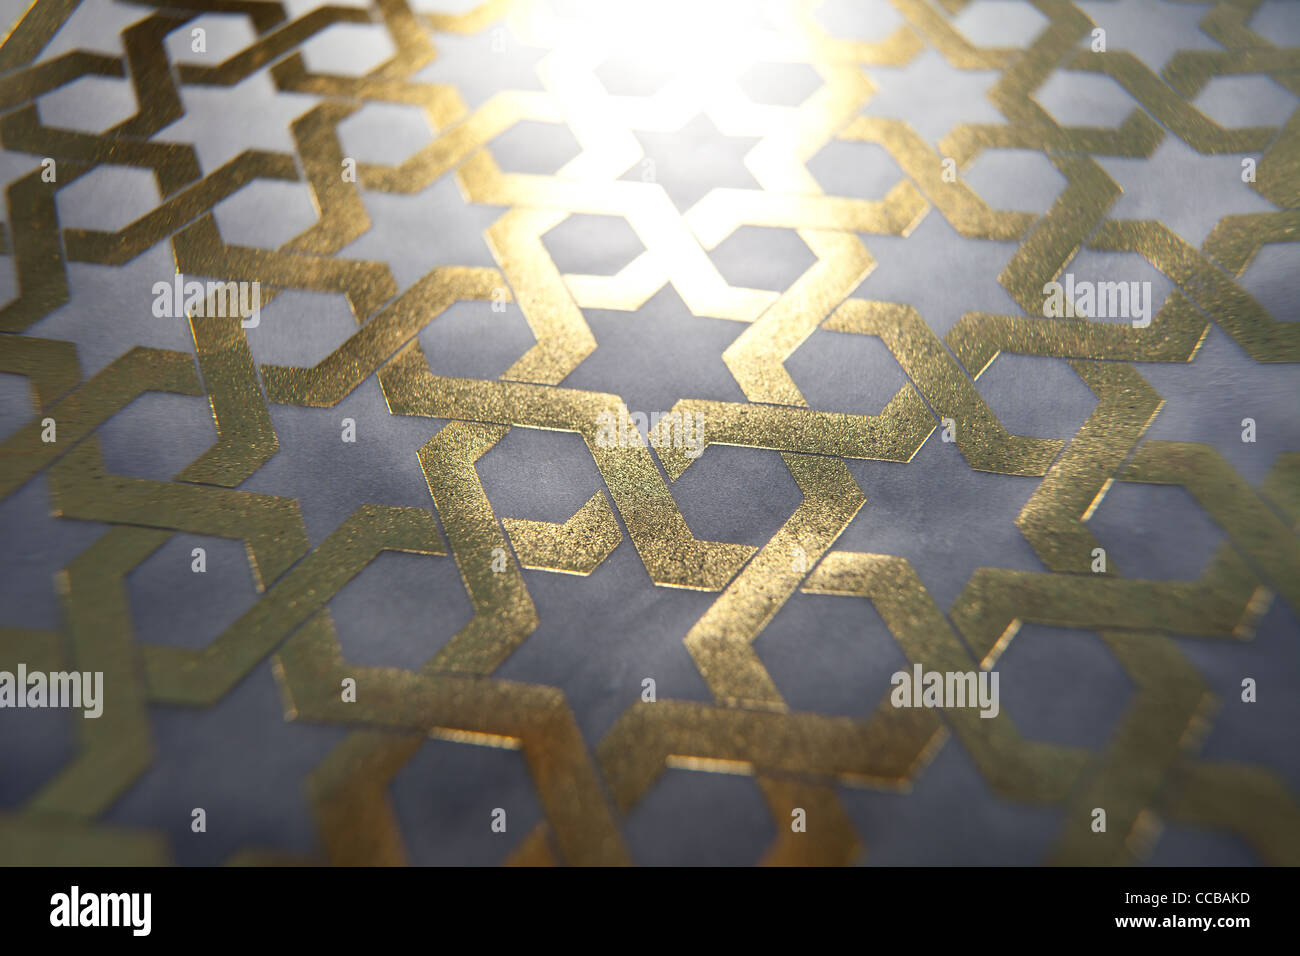 Islamic geometric pattern from Iran, Iranian Muslim pattern in gold leaf middle east, eastern history. Stock Photo